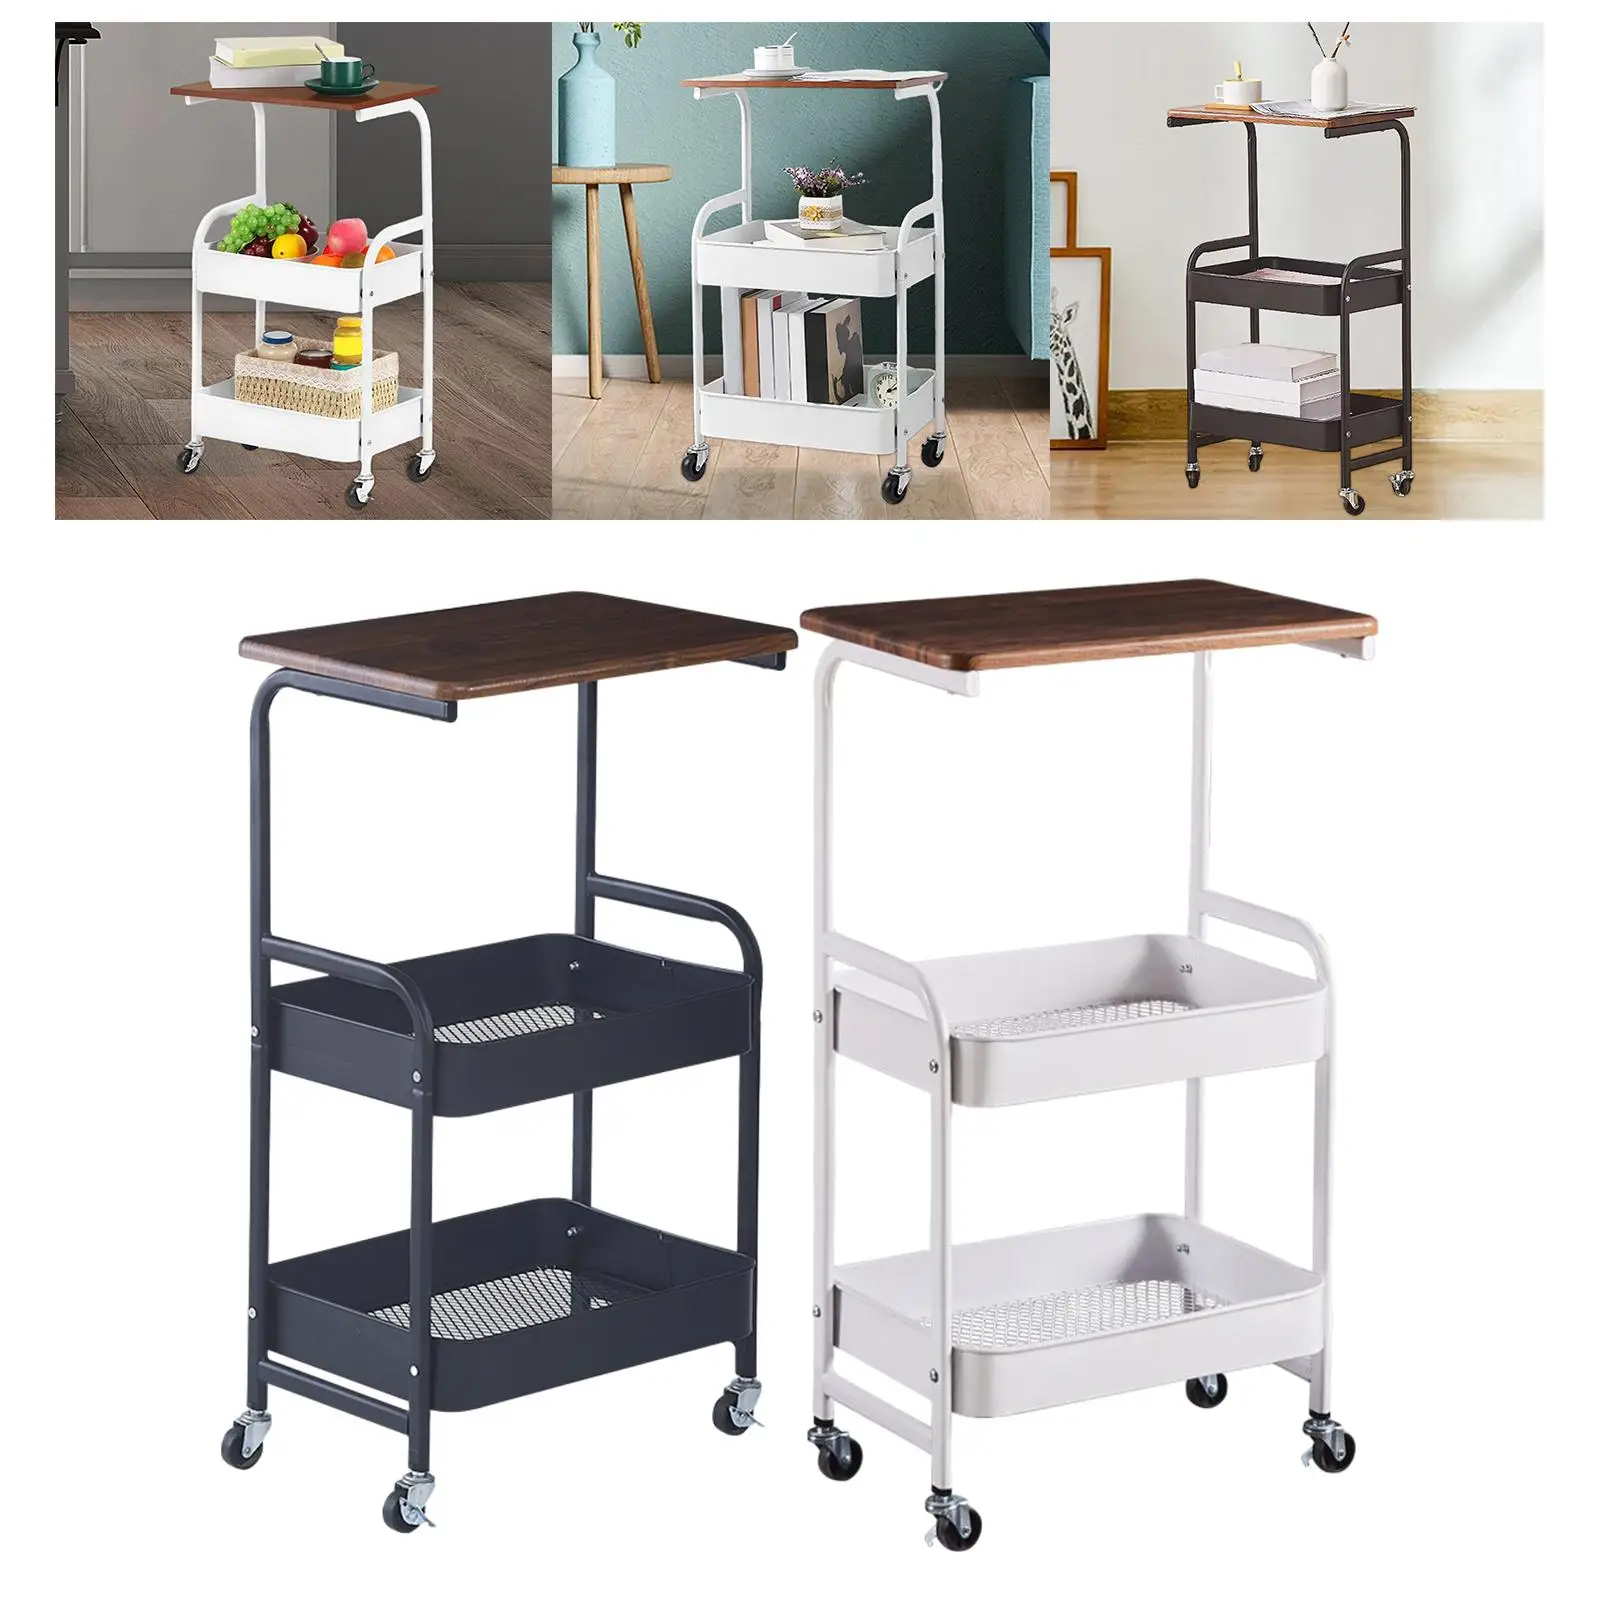 Slim Storage Cart Multipurpose Waterproof Classic Durable Fruits Rack Rolling Cart for Laundry Room Narrow Place Kitchen Bedroom